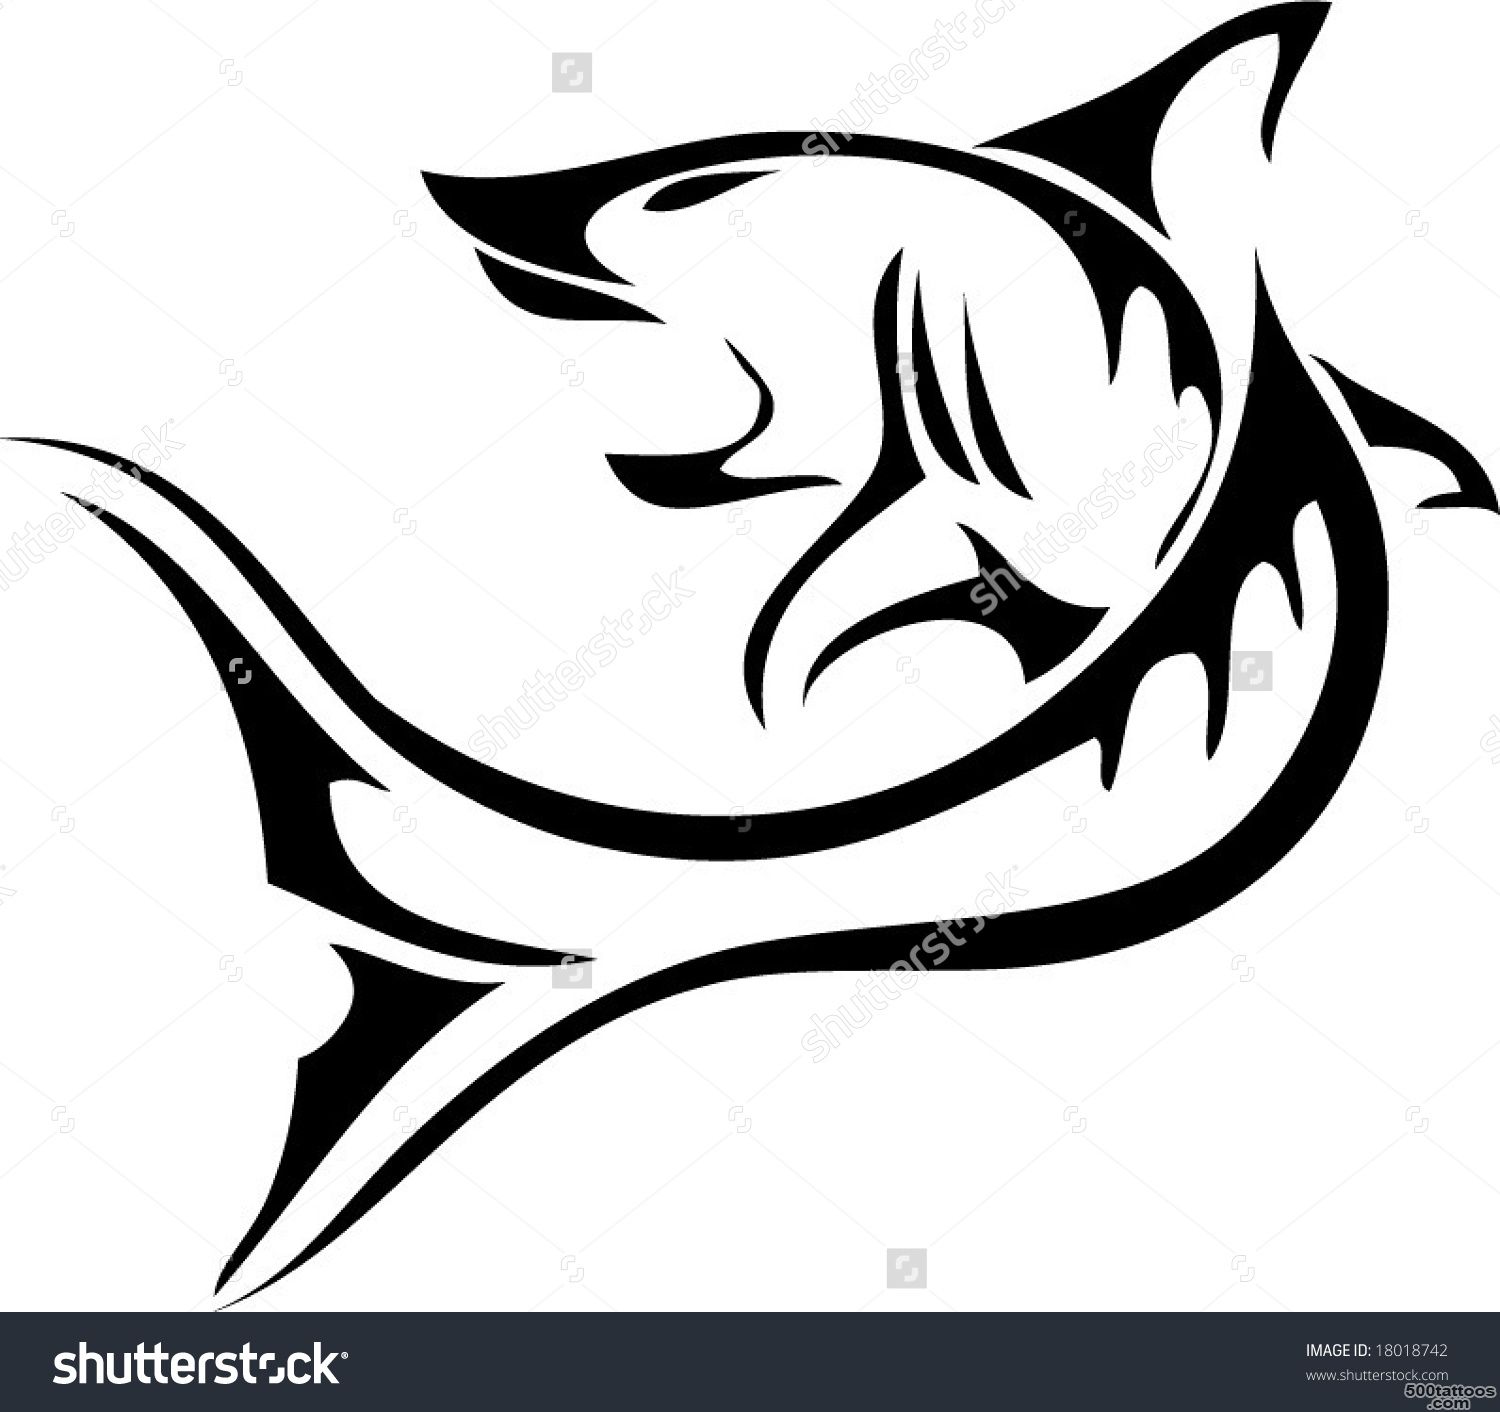 Black Shark Tattoo Stock Photos, Images, amp Pictures  Shutterstock_16